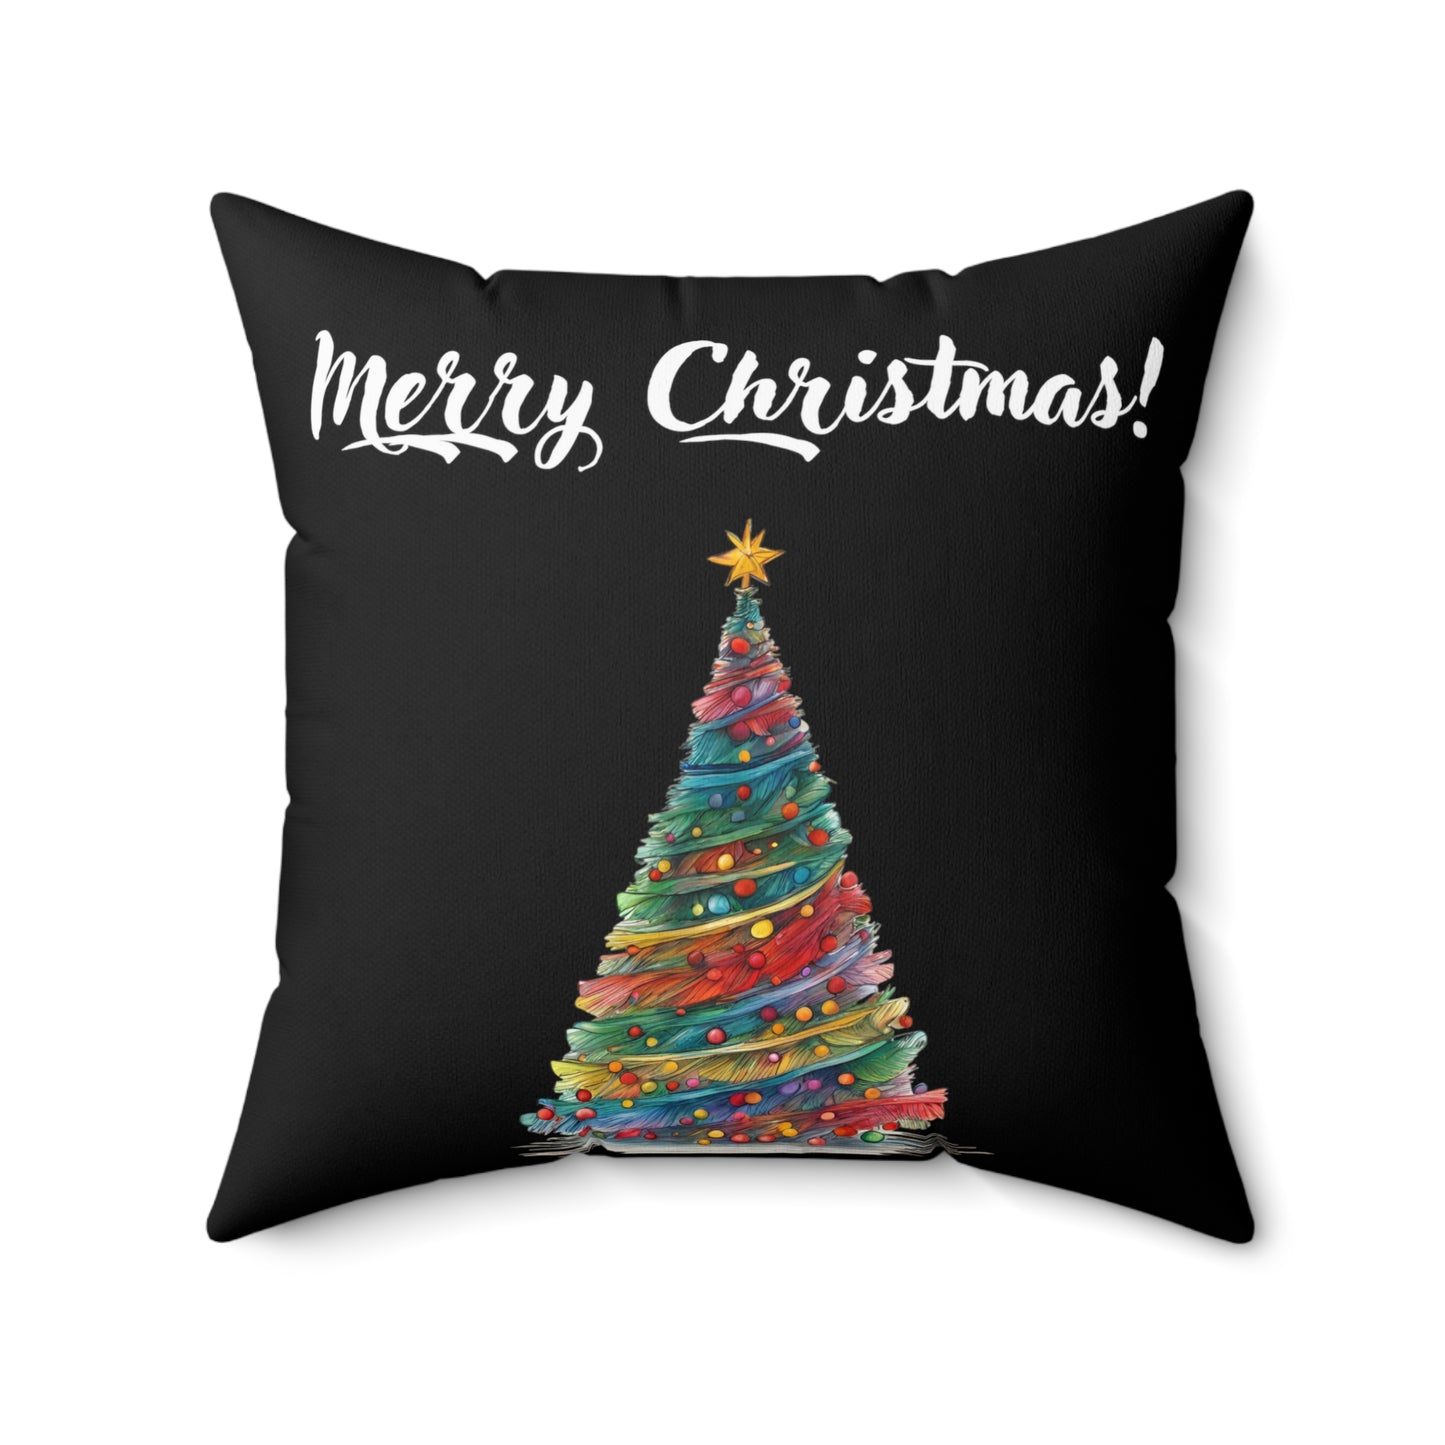 Square Pillow Merry Christmas